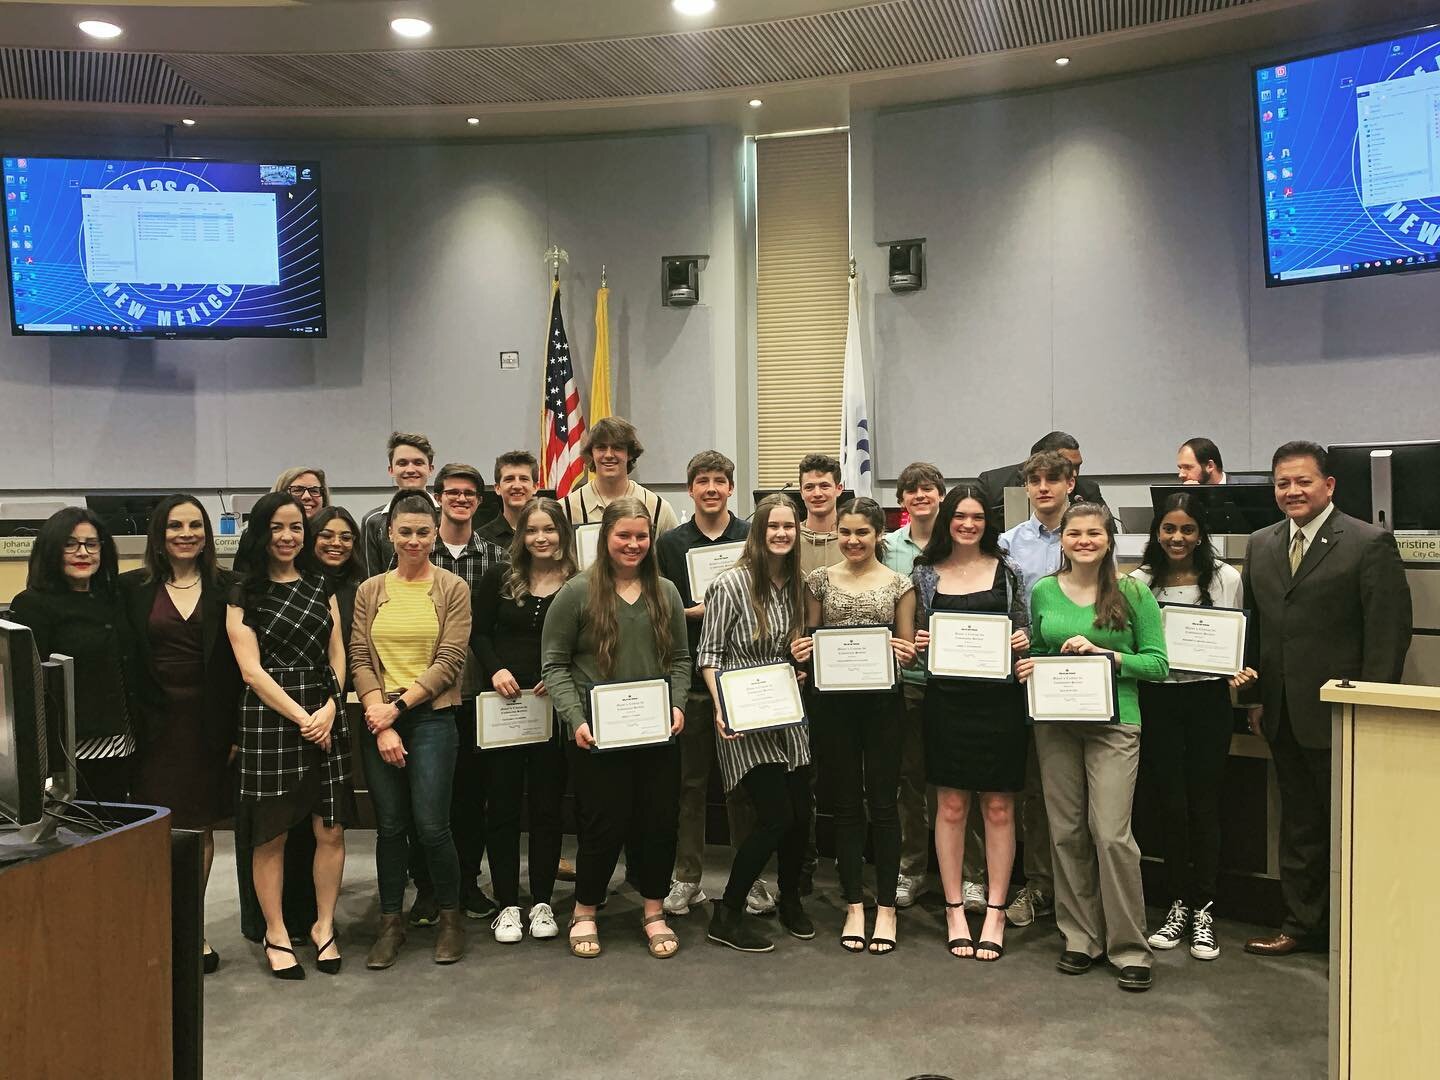 Students inolved with the HandinHand organization, which they started, are recognized at a recent Las Cruces City Council meeting for their work helping children.